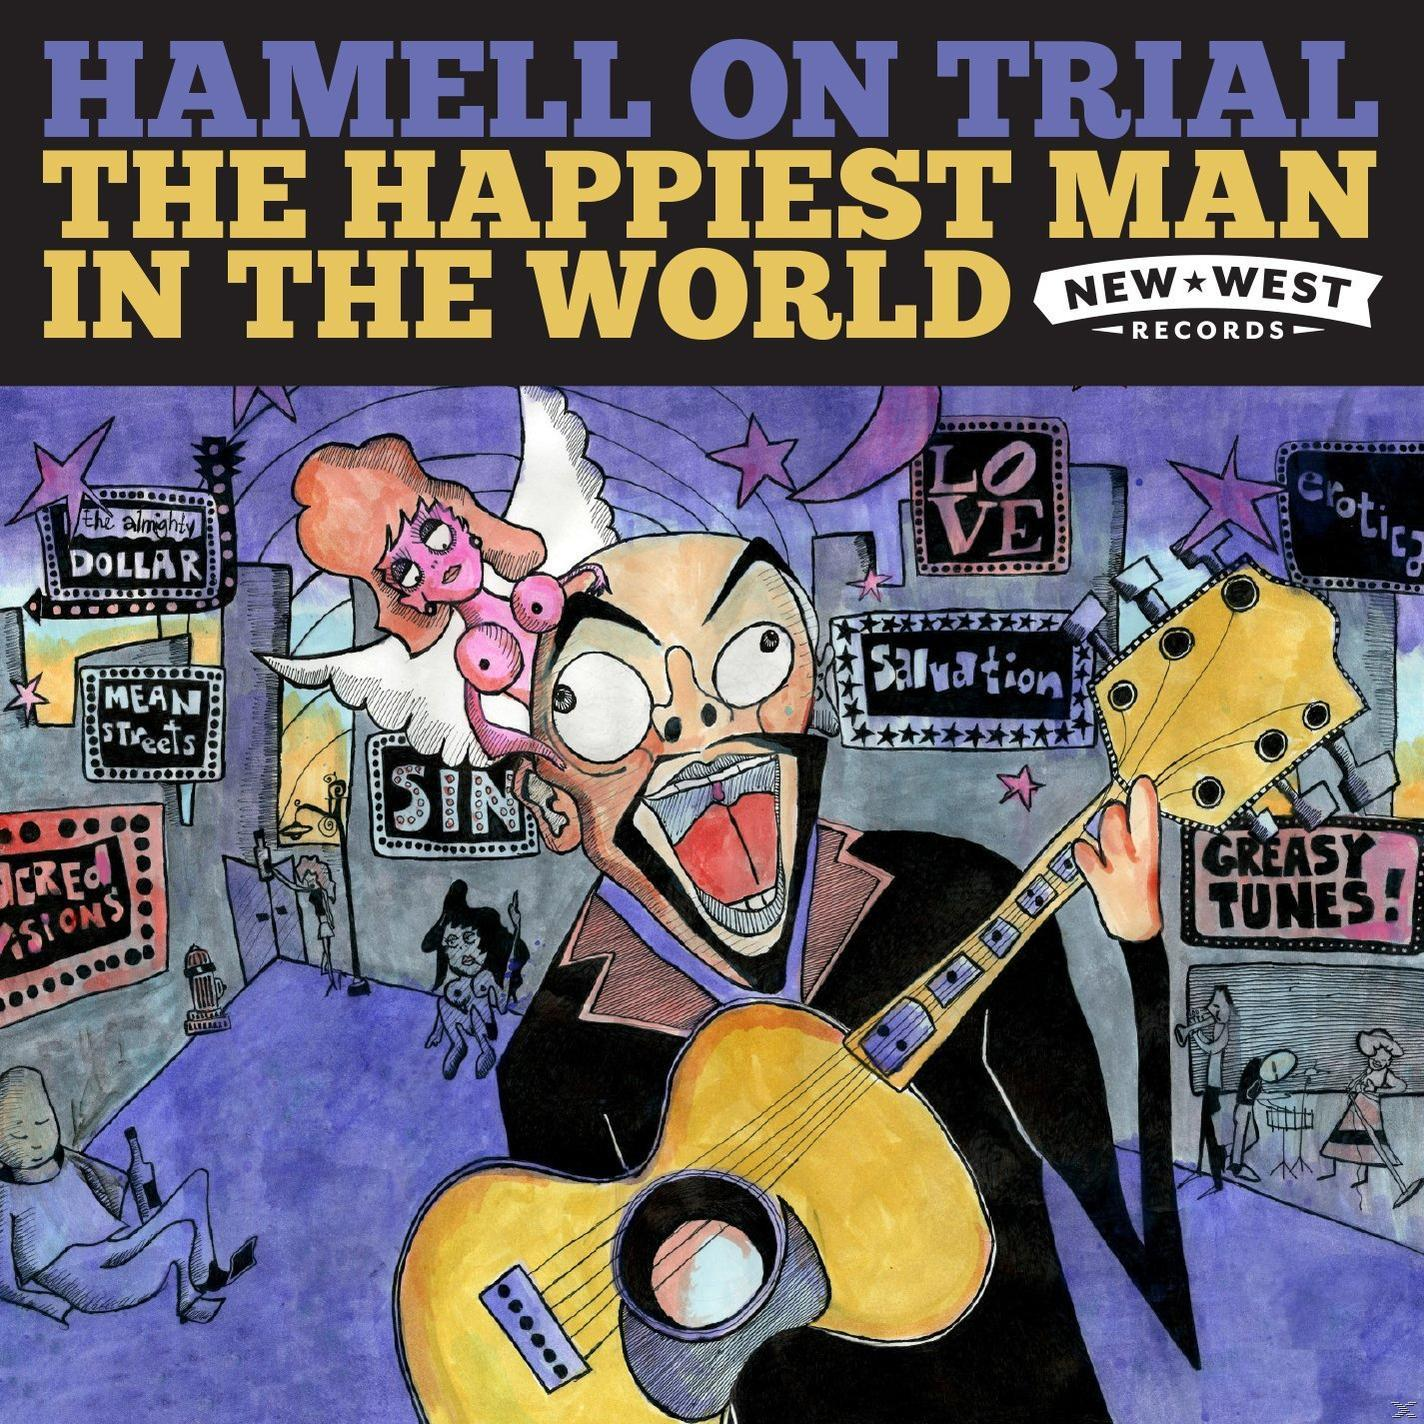 Hamell World Happiest - - Trial In The (Vinyl) Man On The